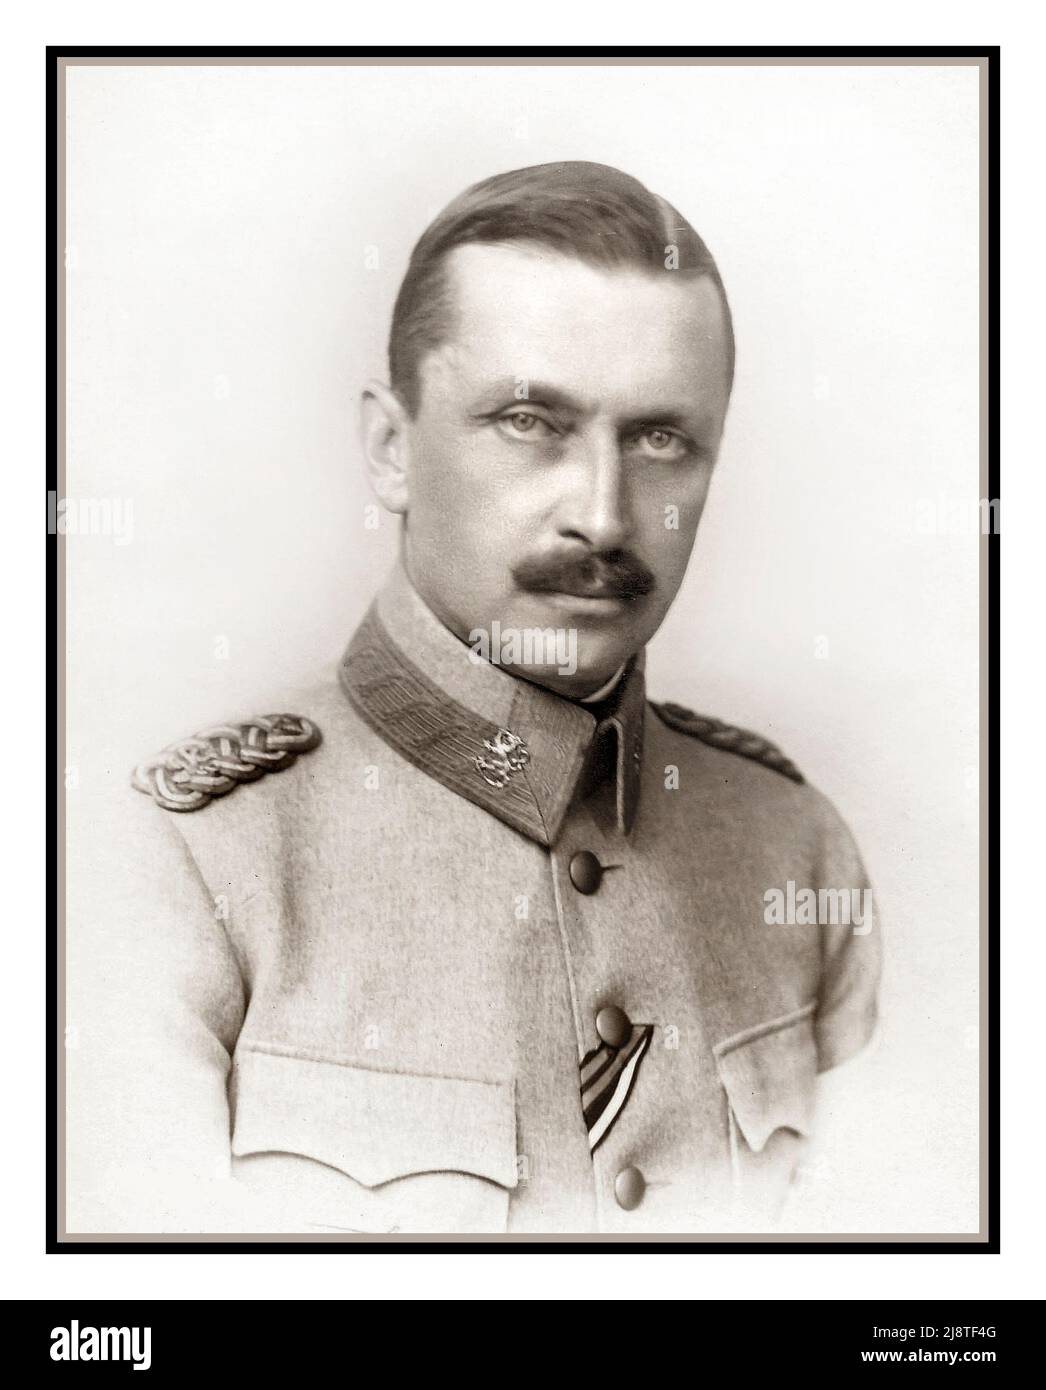 Carl Gustaf Emil Mannerheim of Finland as a young army officer. Date 1920s. Baron Carl Gustaf Emil Mannerheimˌ; 4 June 1867 – 27 January 1951) was a Finnish military leader and statesman He served as the military leader of the Whites in the Finnish Civil War of 1918, as Regent of Finland (1918–1919), as commander-in-chief of Finland's defence forces during the period of World War II (1939–1945), as Marshal of Finland (1942–), and as the sixth president of Finland (1944–1946). Stock Photo